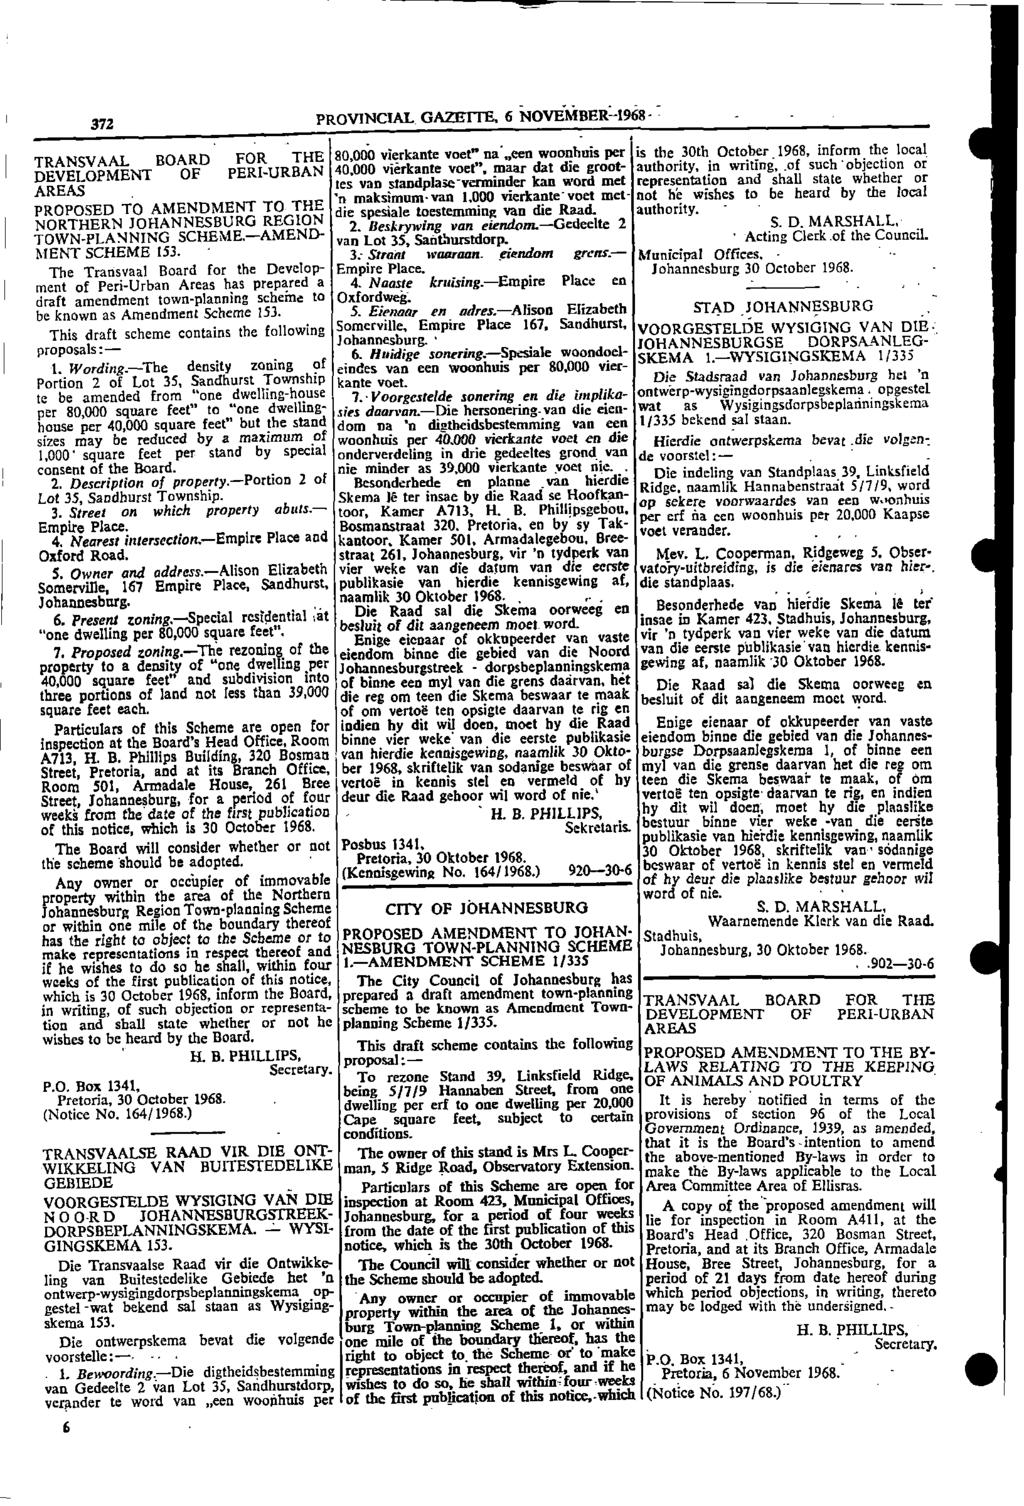 1 _ef _ 372 PROVINCIAL GAZETTE, 6 NOVEMBER I968, TRANSVAAL BOARD FOR THE 80,000 vierkante voet" na een woonhuis per is the 30th October 1968, inform the local DEVELOPMENT OF PERIURBAN 40000 vierkante